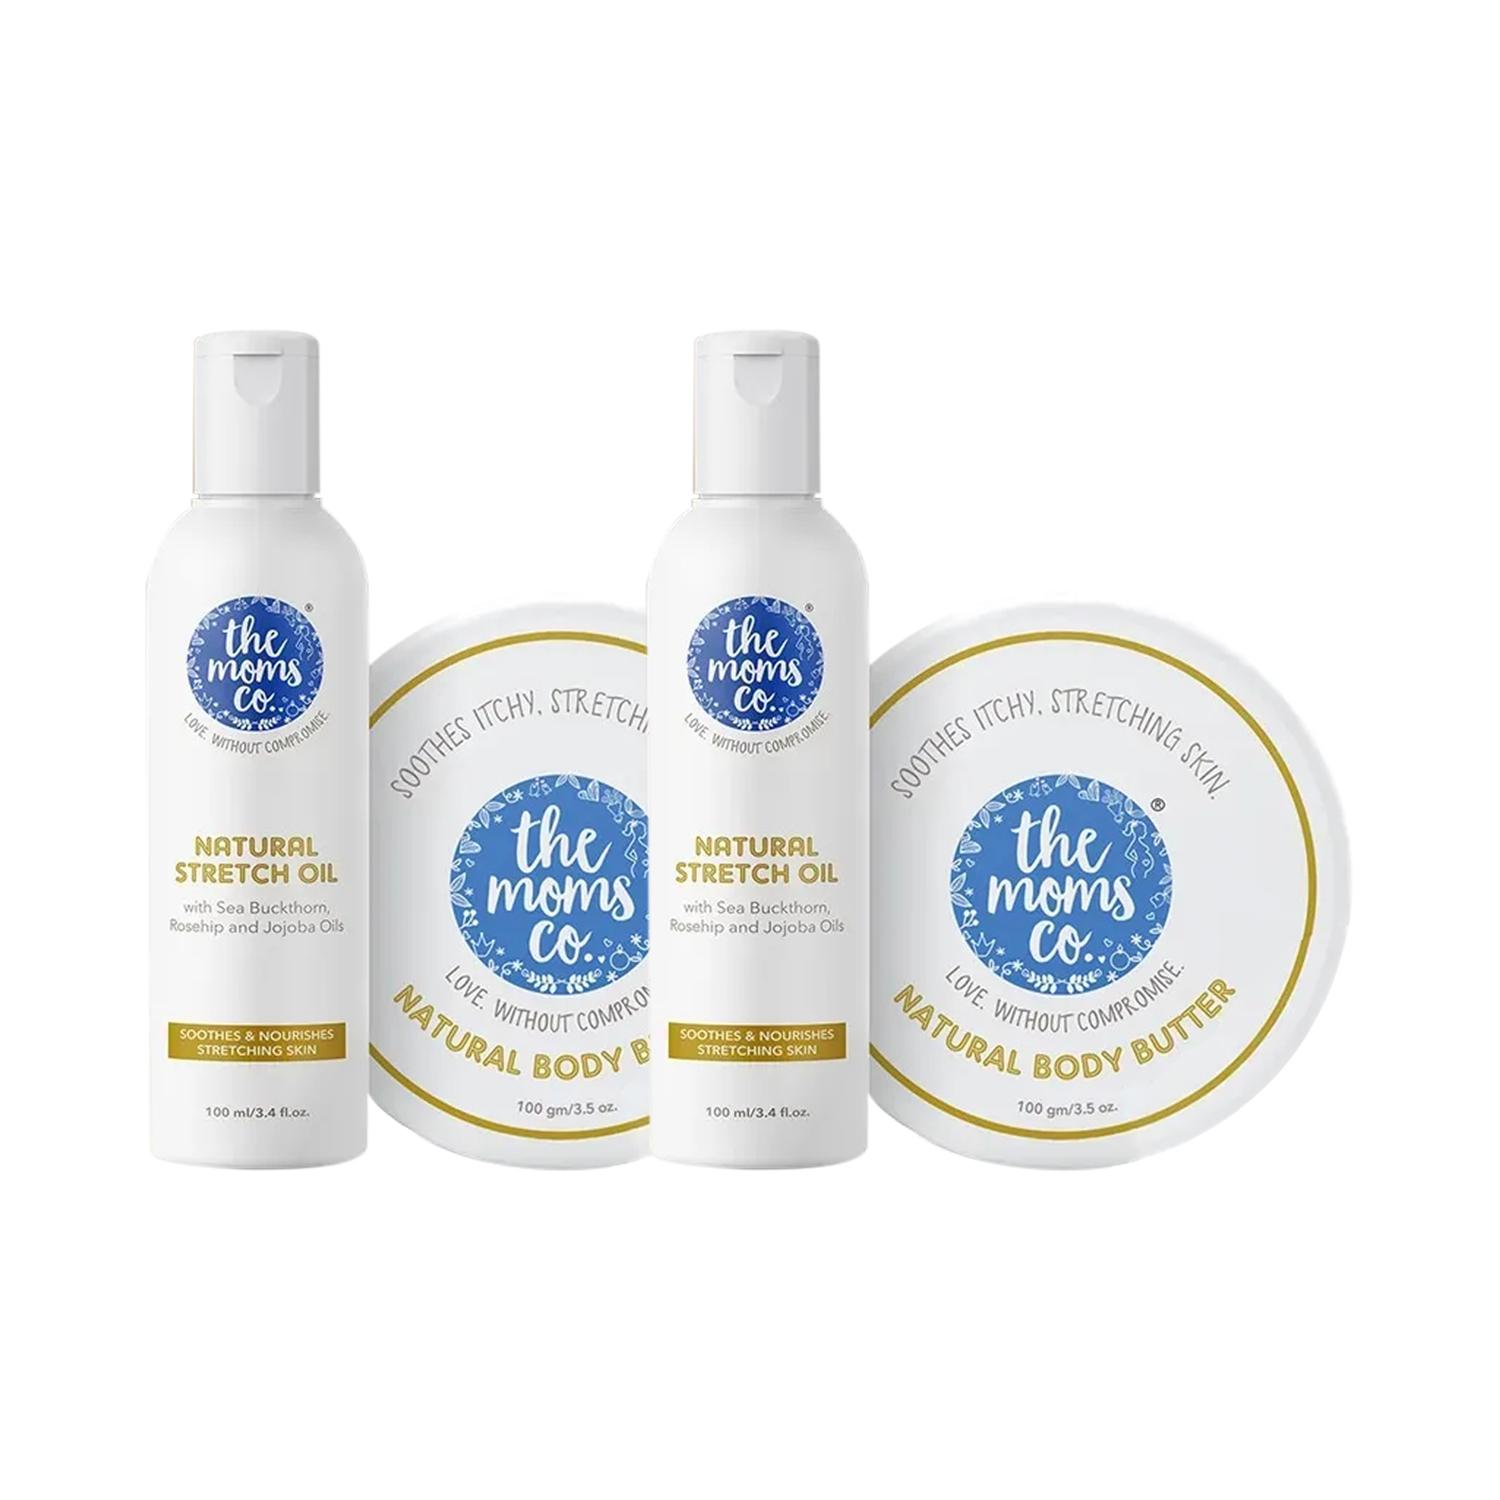 The Mom's Co. | The Mom's Co. Natural Stretch Marks Bundle (100gm+100ml) (Pack of 2) Combo